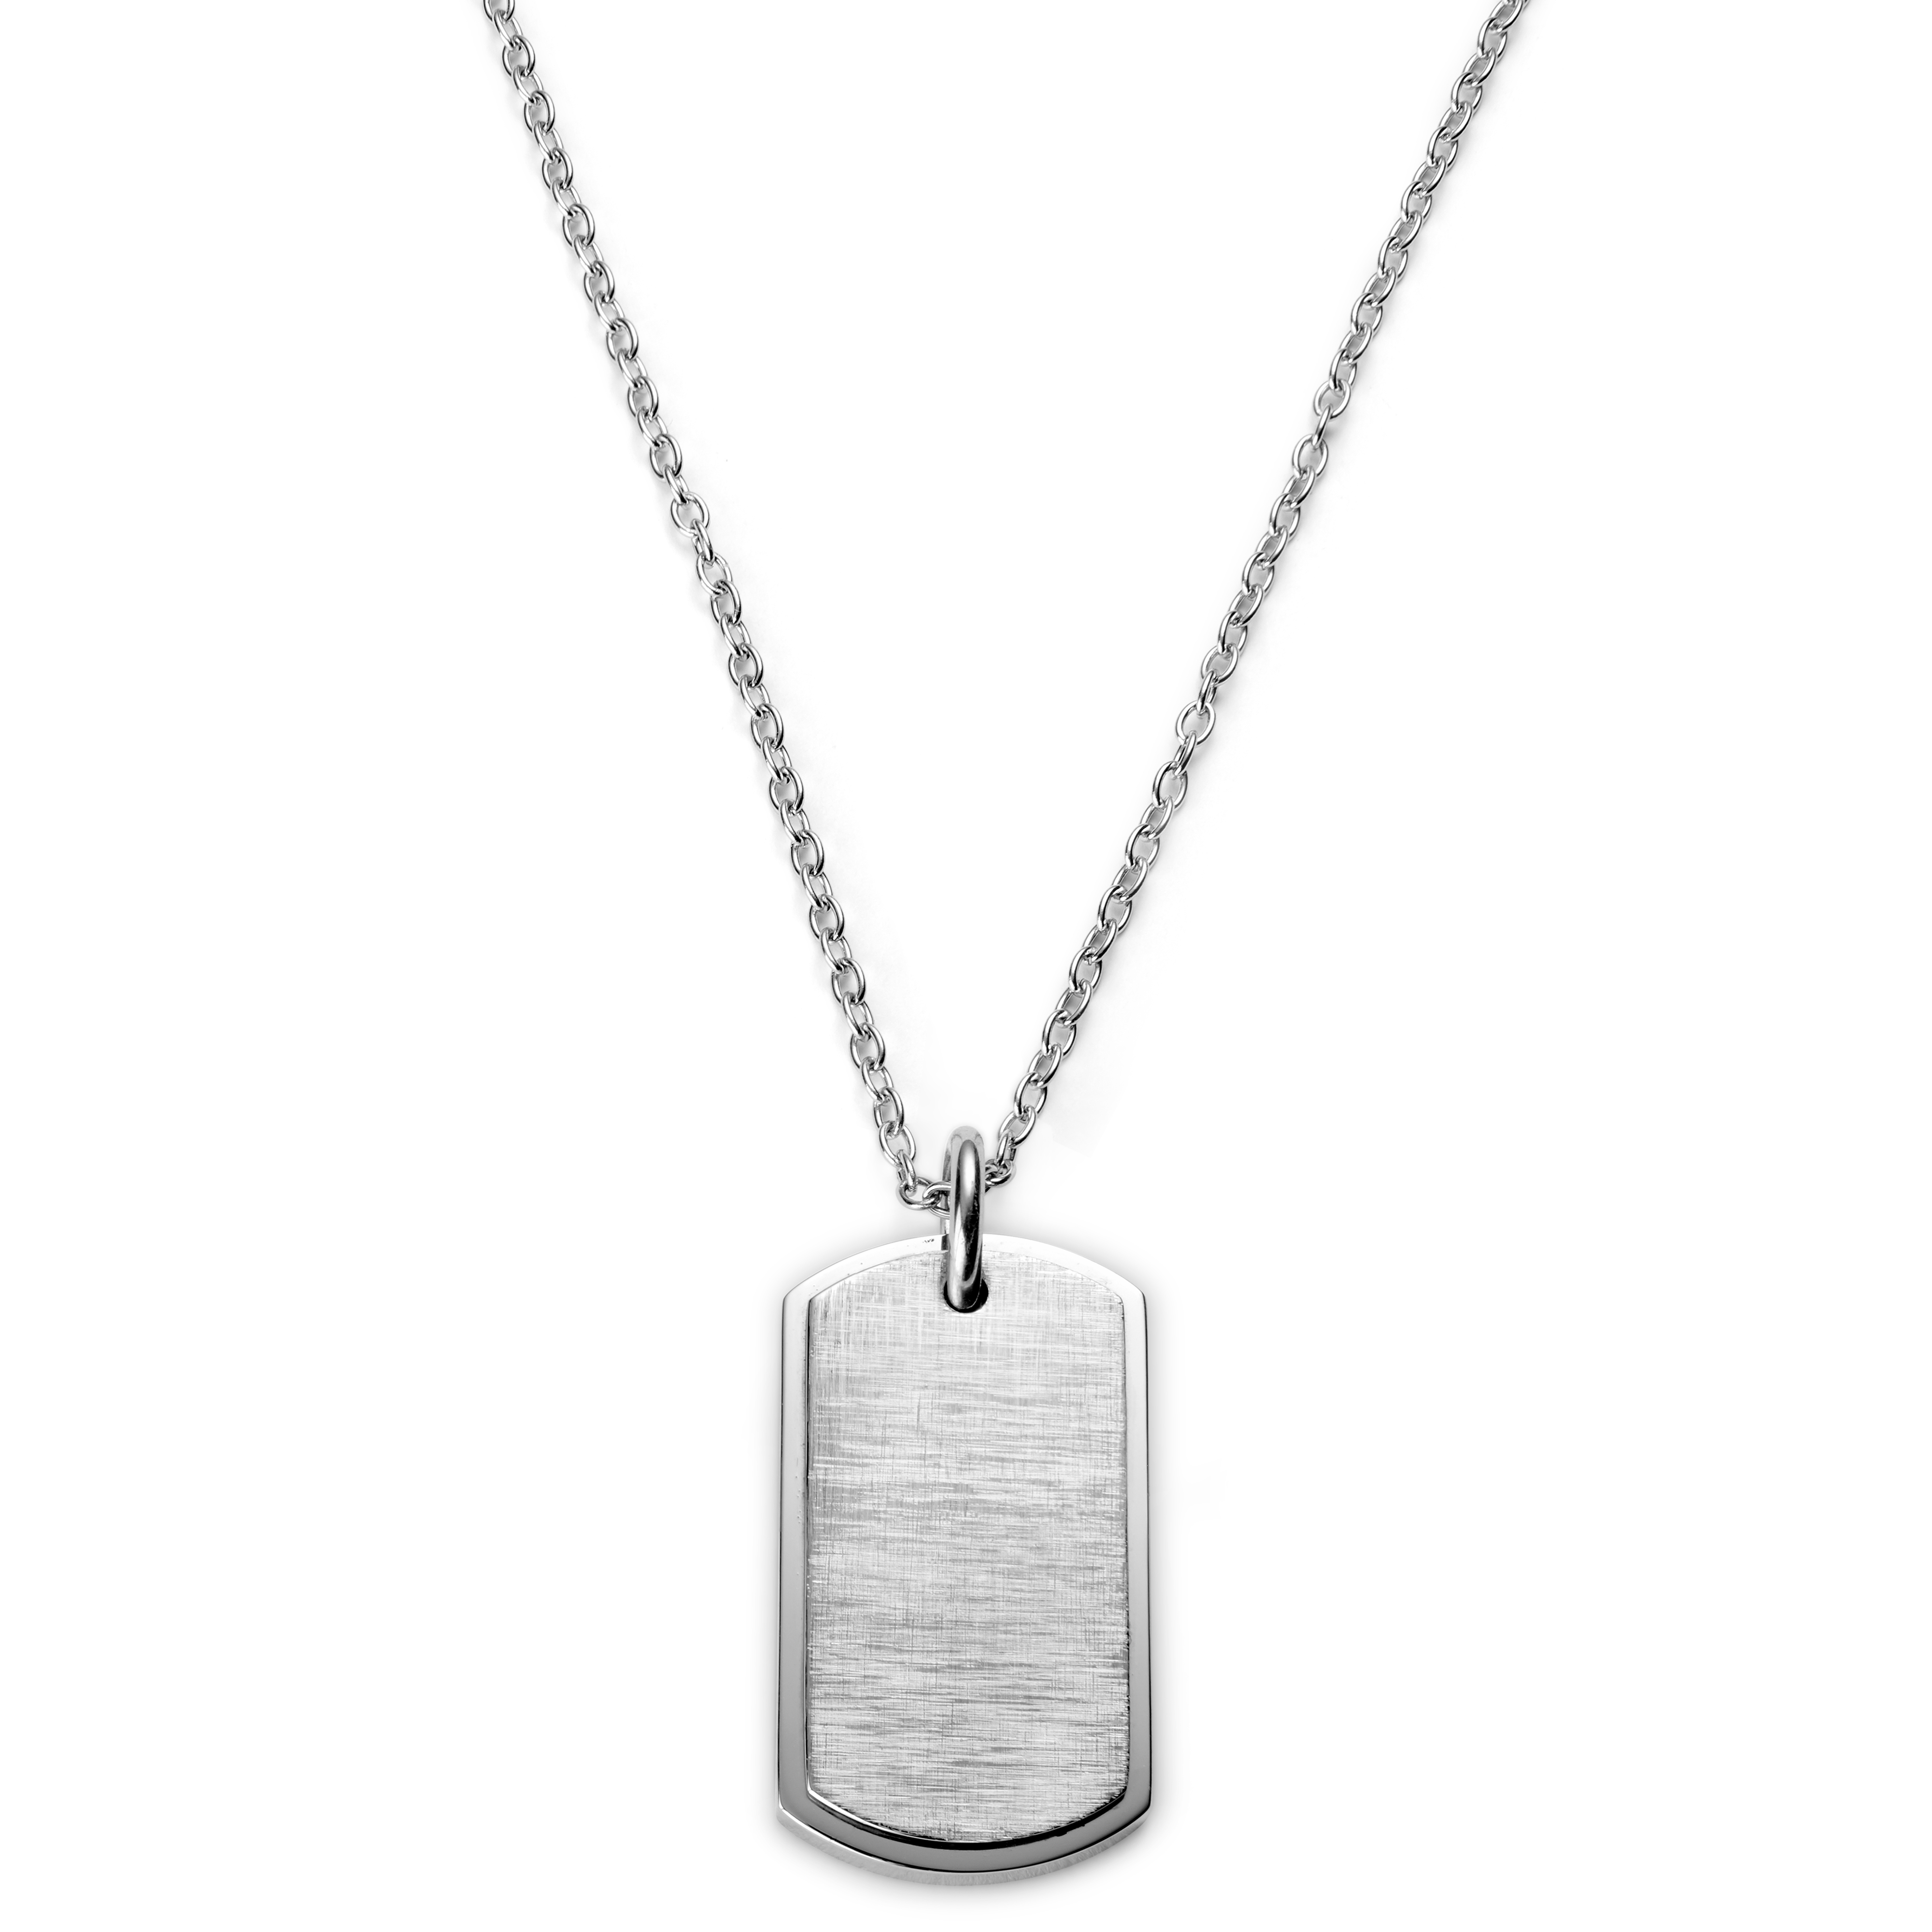 Dog Tag Necklace | Mens dog tag necklace, Mens pendant, Layered necklaces  silver